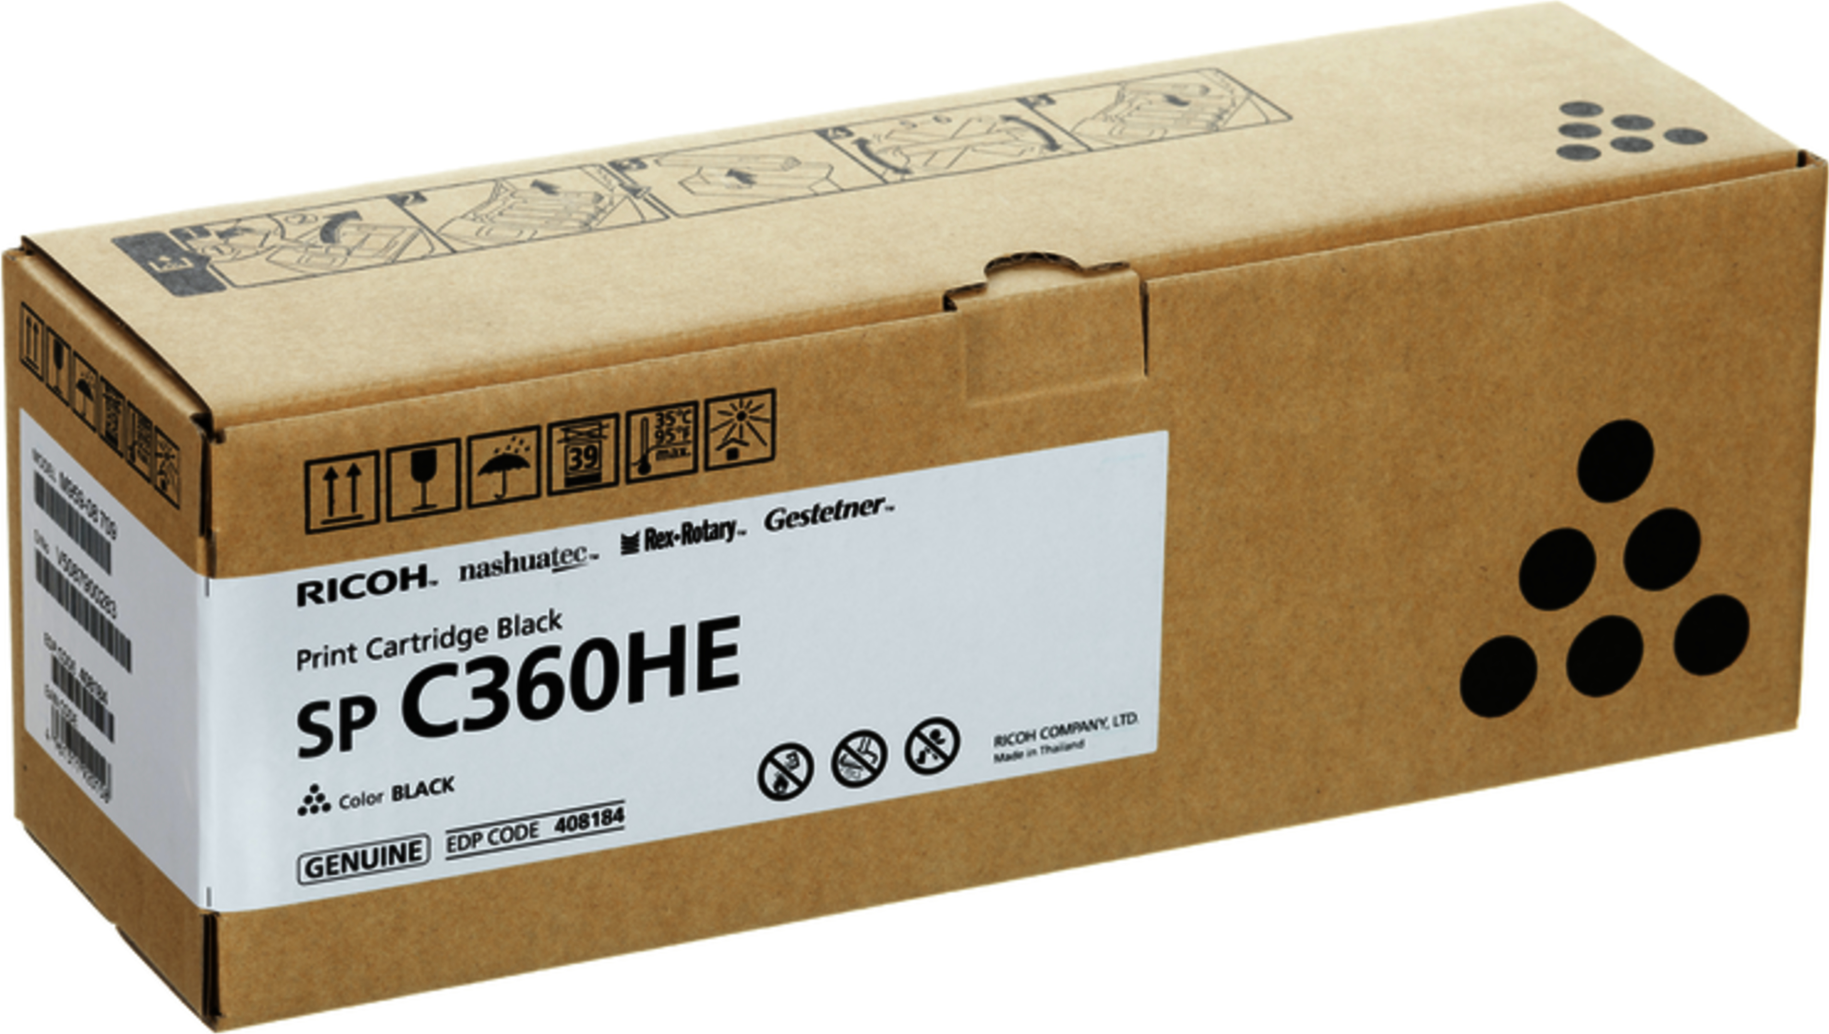 RICOH Toner Catrige Black for SP C360DNw standard capacity 7k pages ISO/IEC 19798